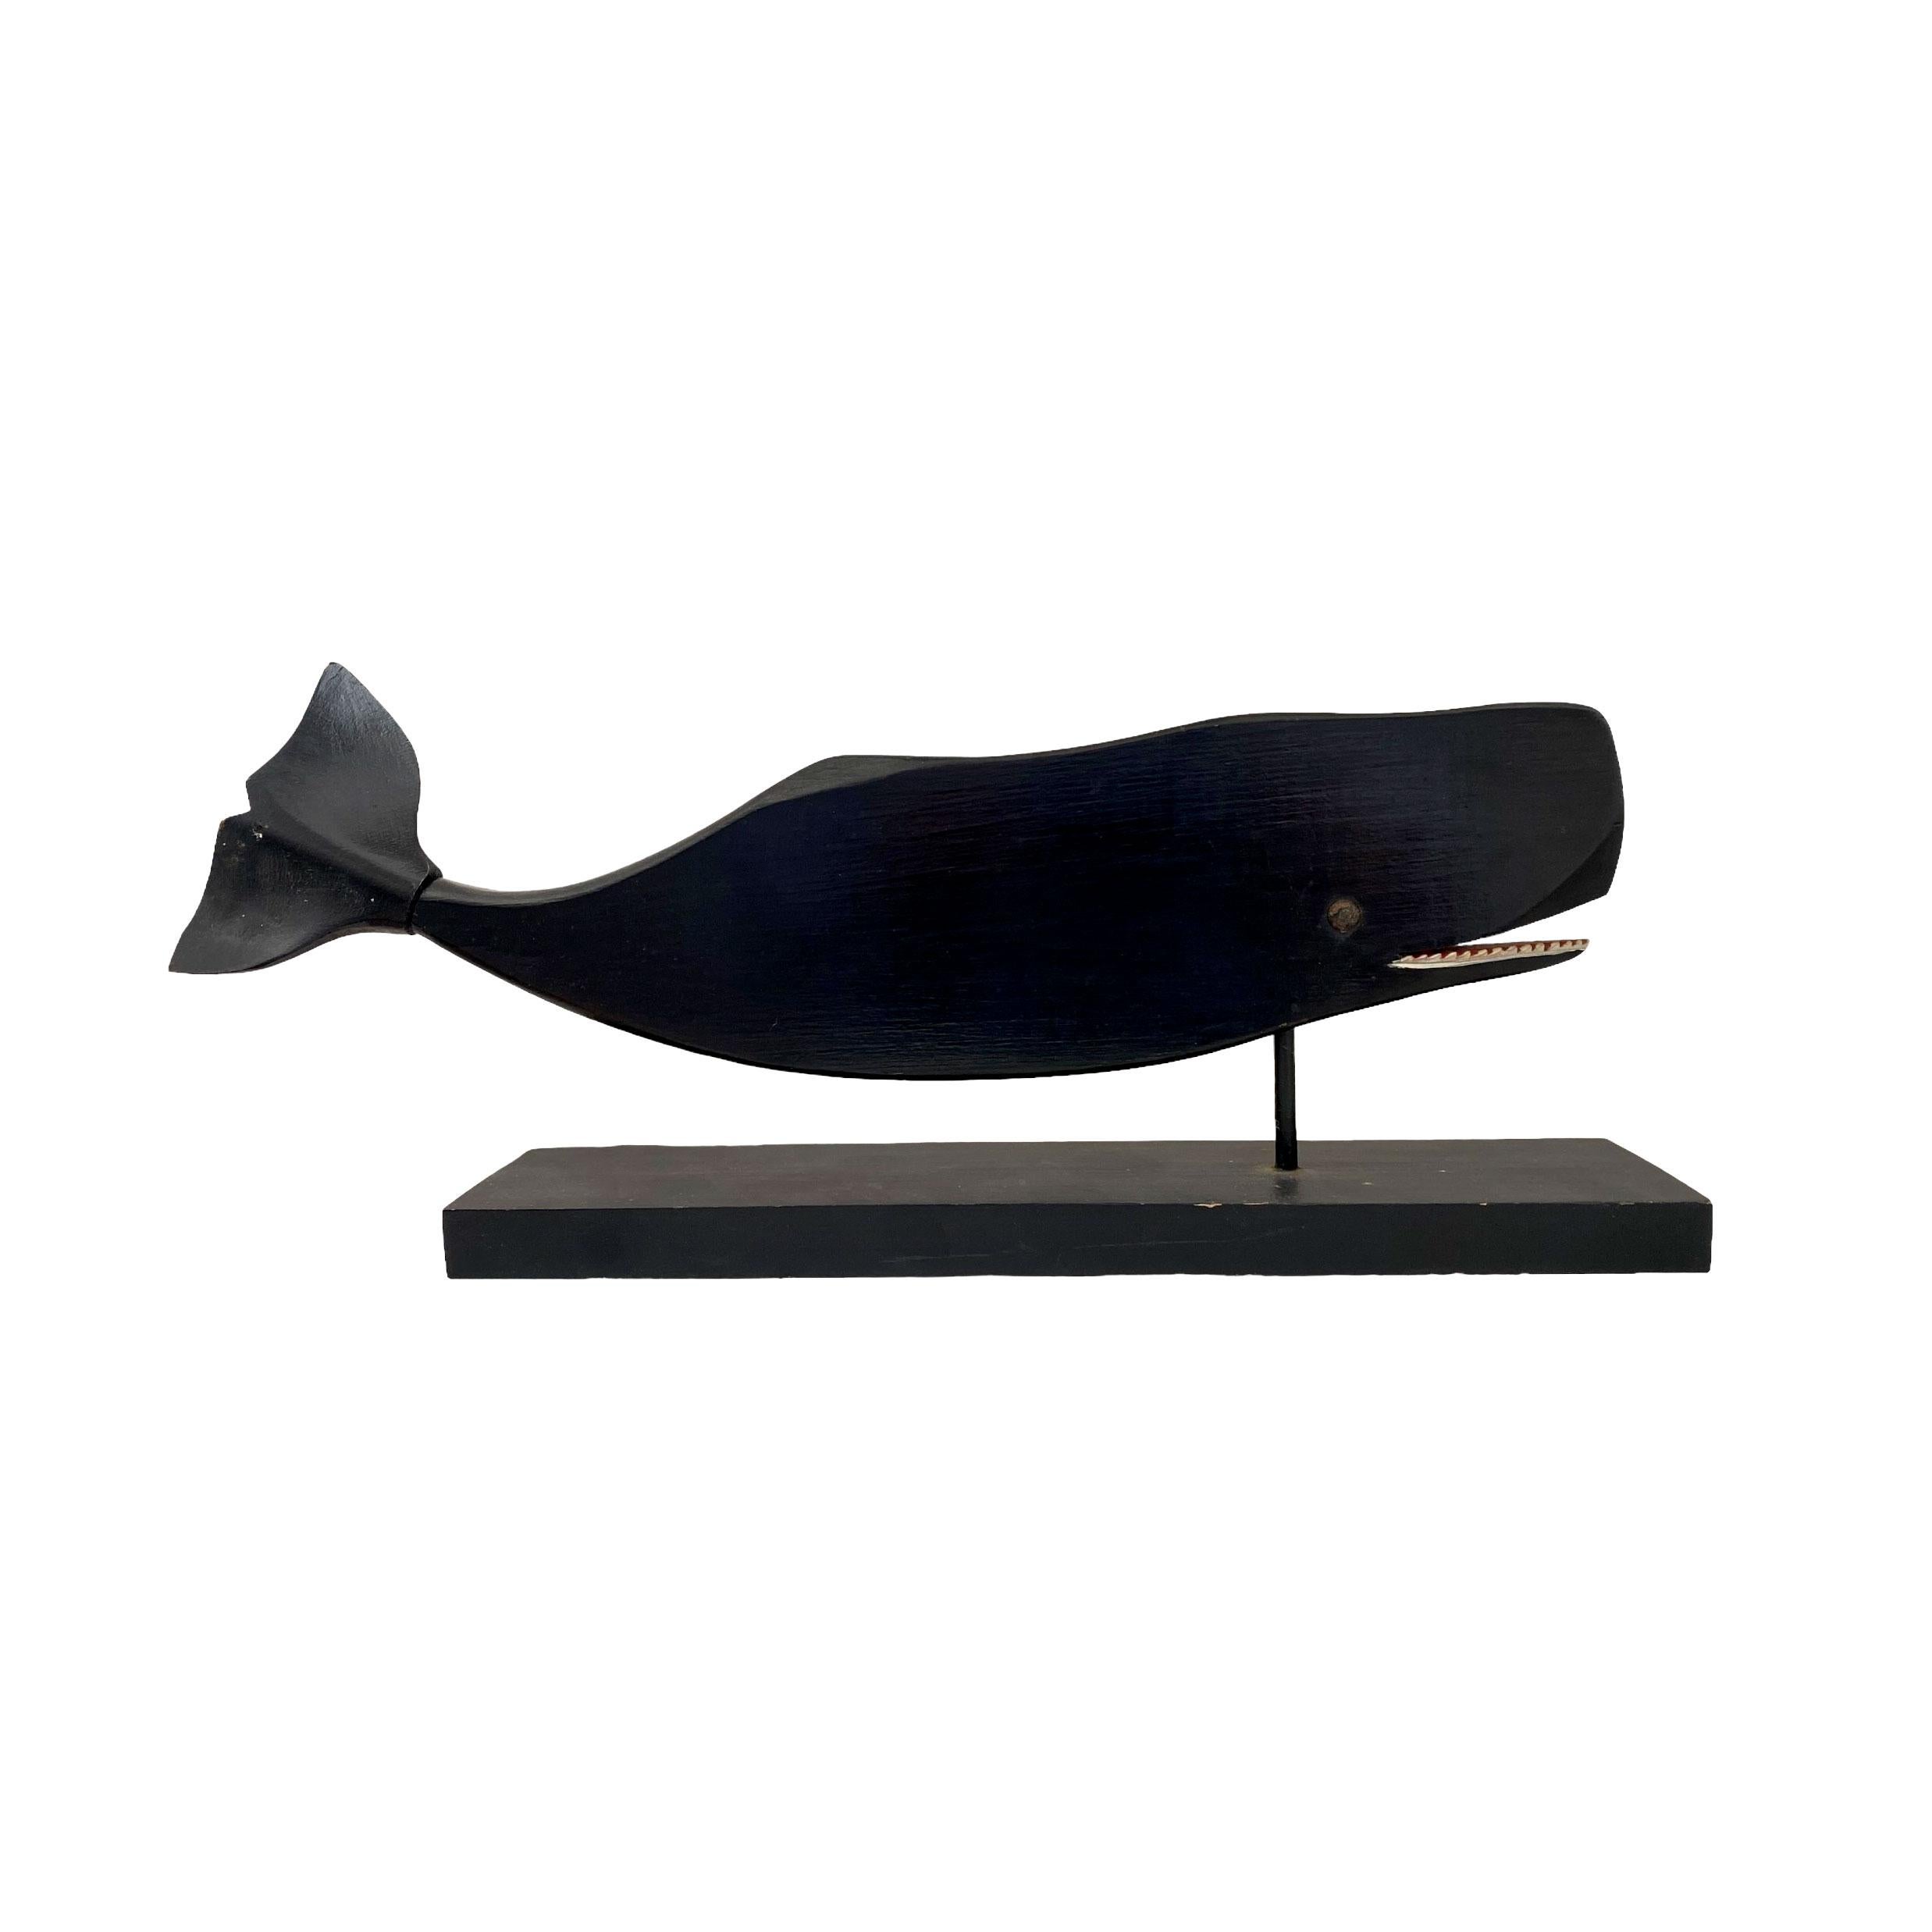 Folk Art Whale Whirligig by Lincoln Ceely, circa 1940s